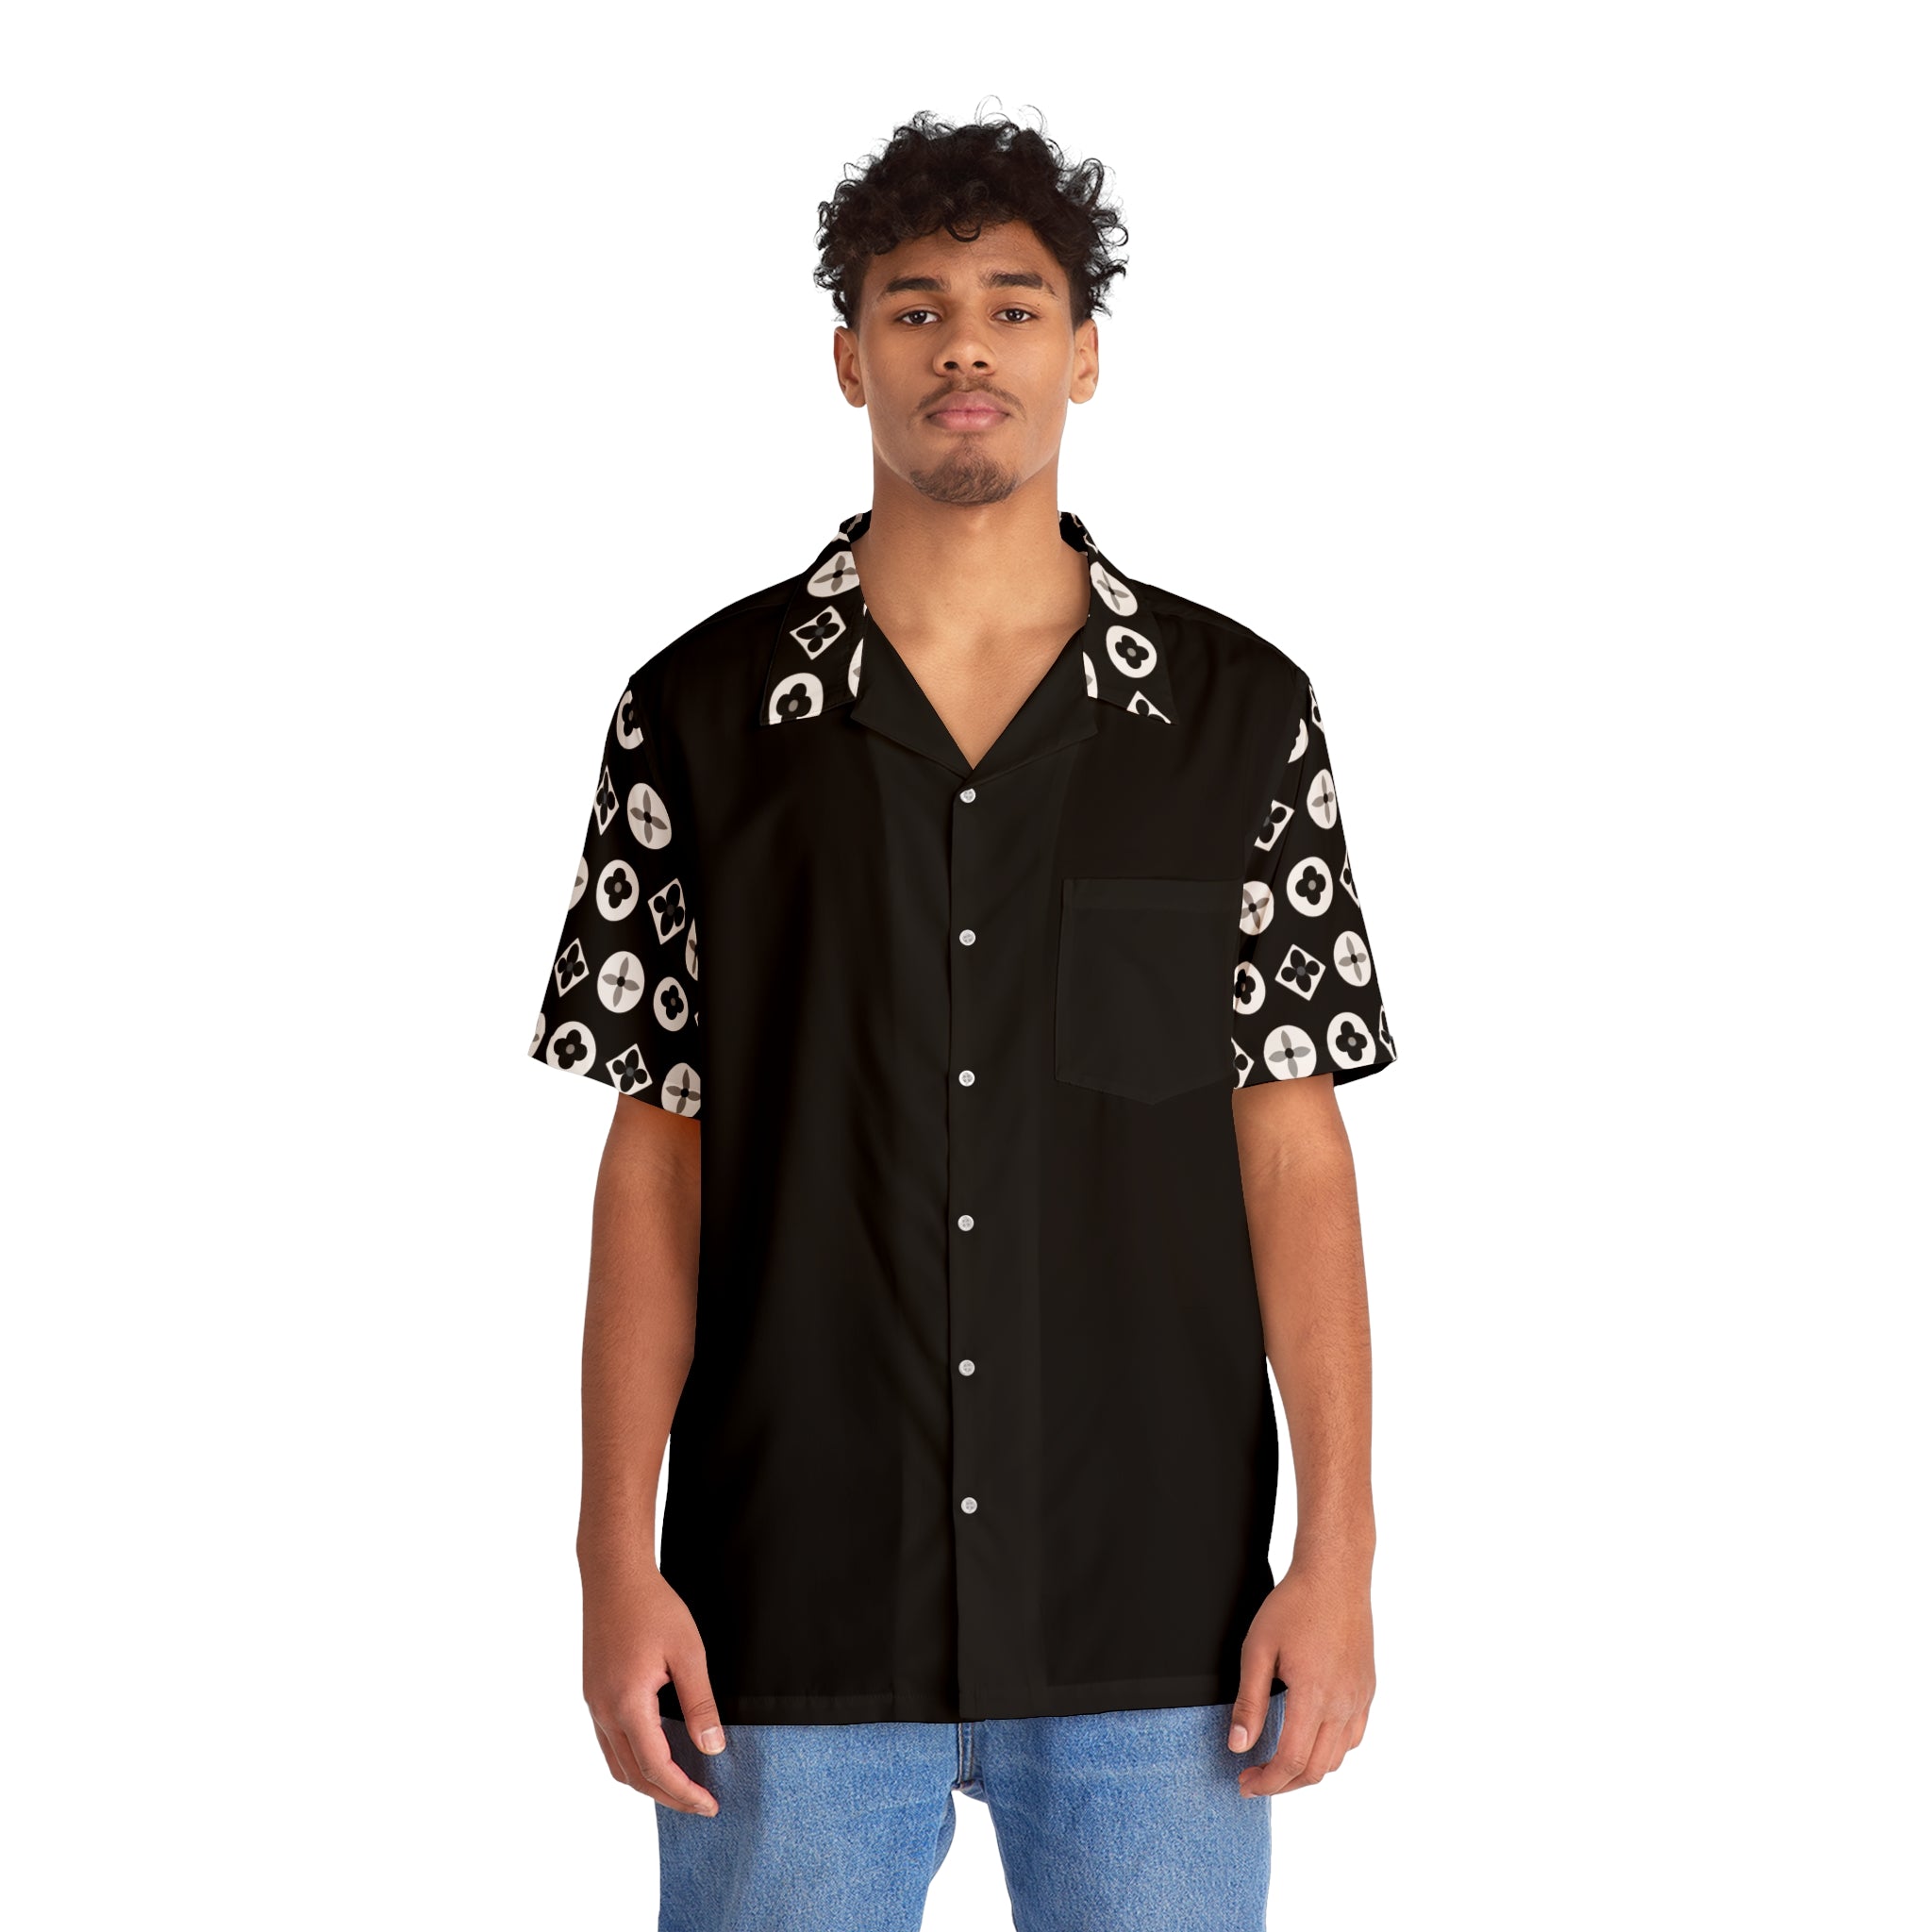 Groove Collection Trilogy of Icons Solid Block (Black, White) Unisex Gender Neutral Black Button Up Shirt, Hawaiian Shirt